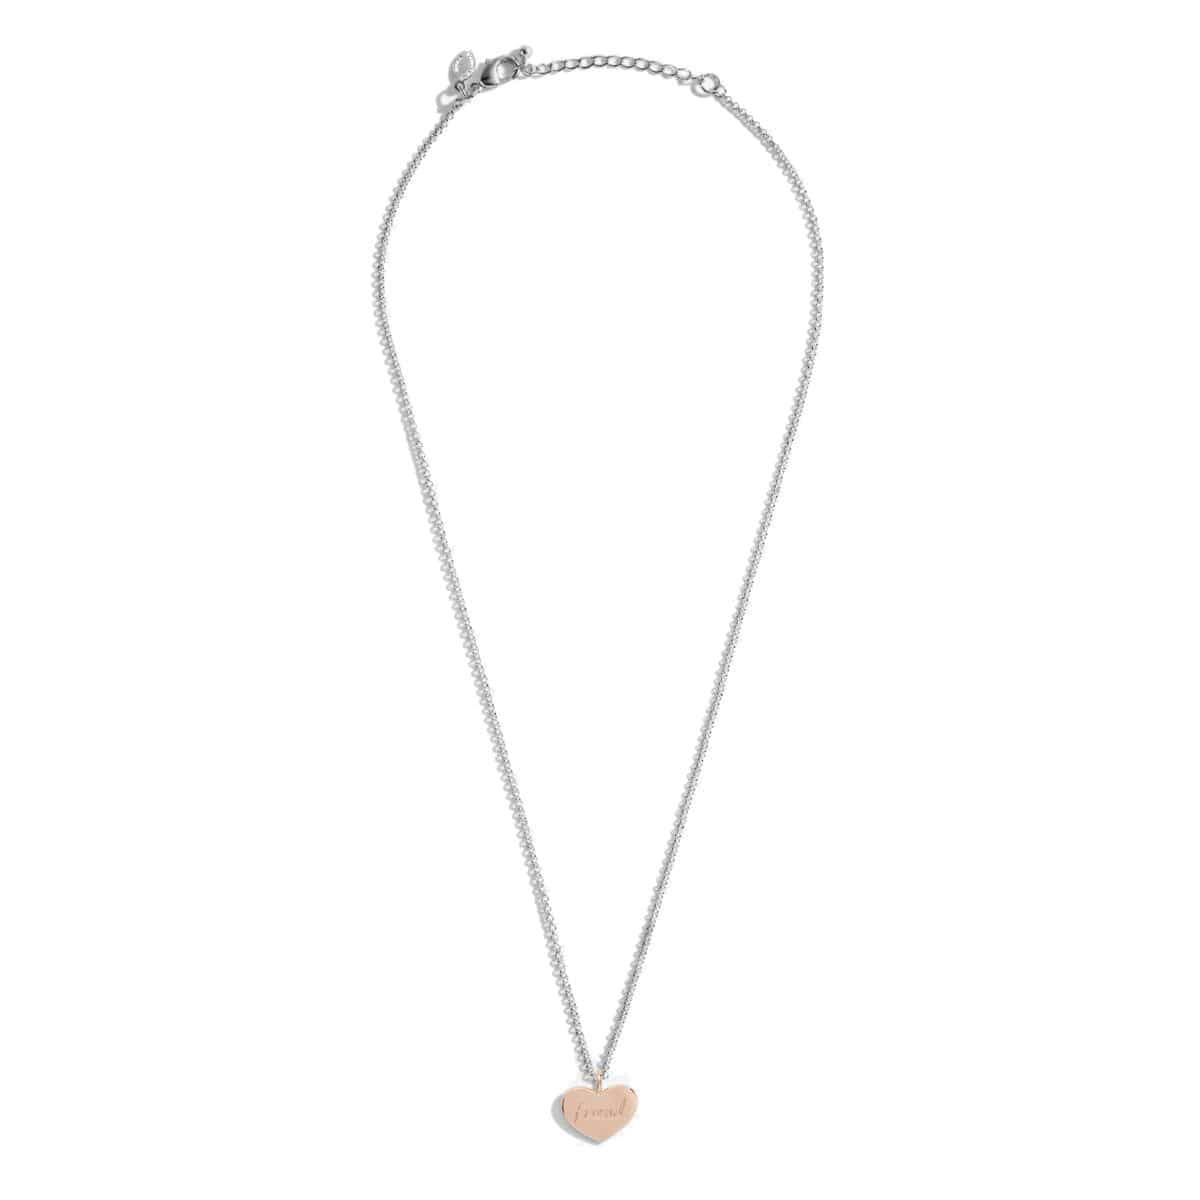 Joma Jewellery Necklaces Joma Jewellery Necklace - A Little Friend For Life